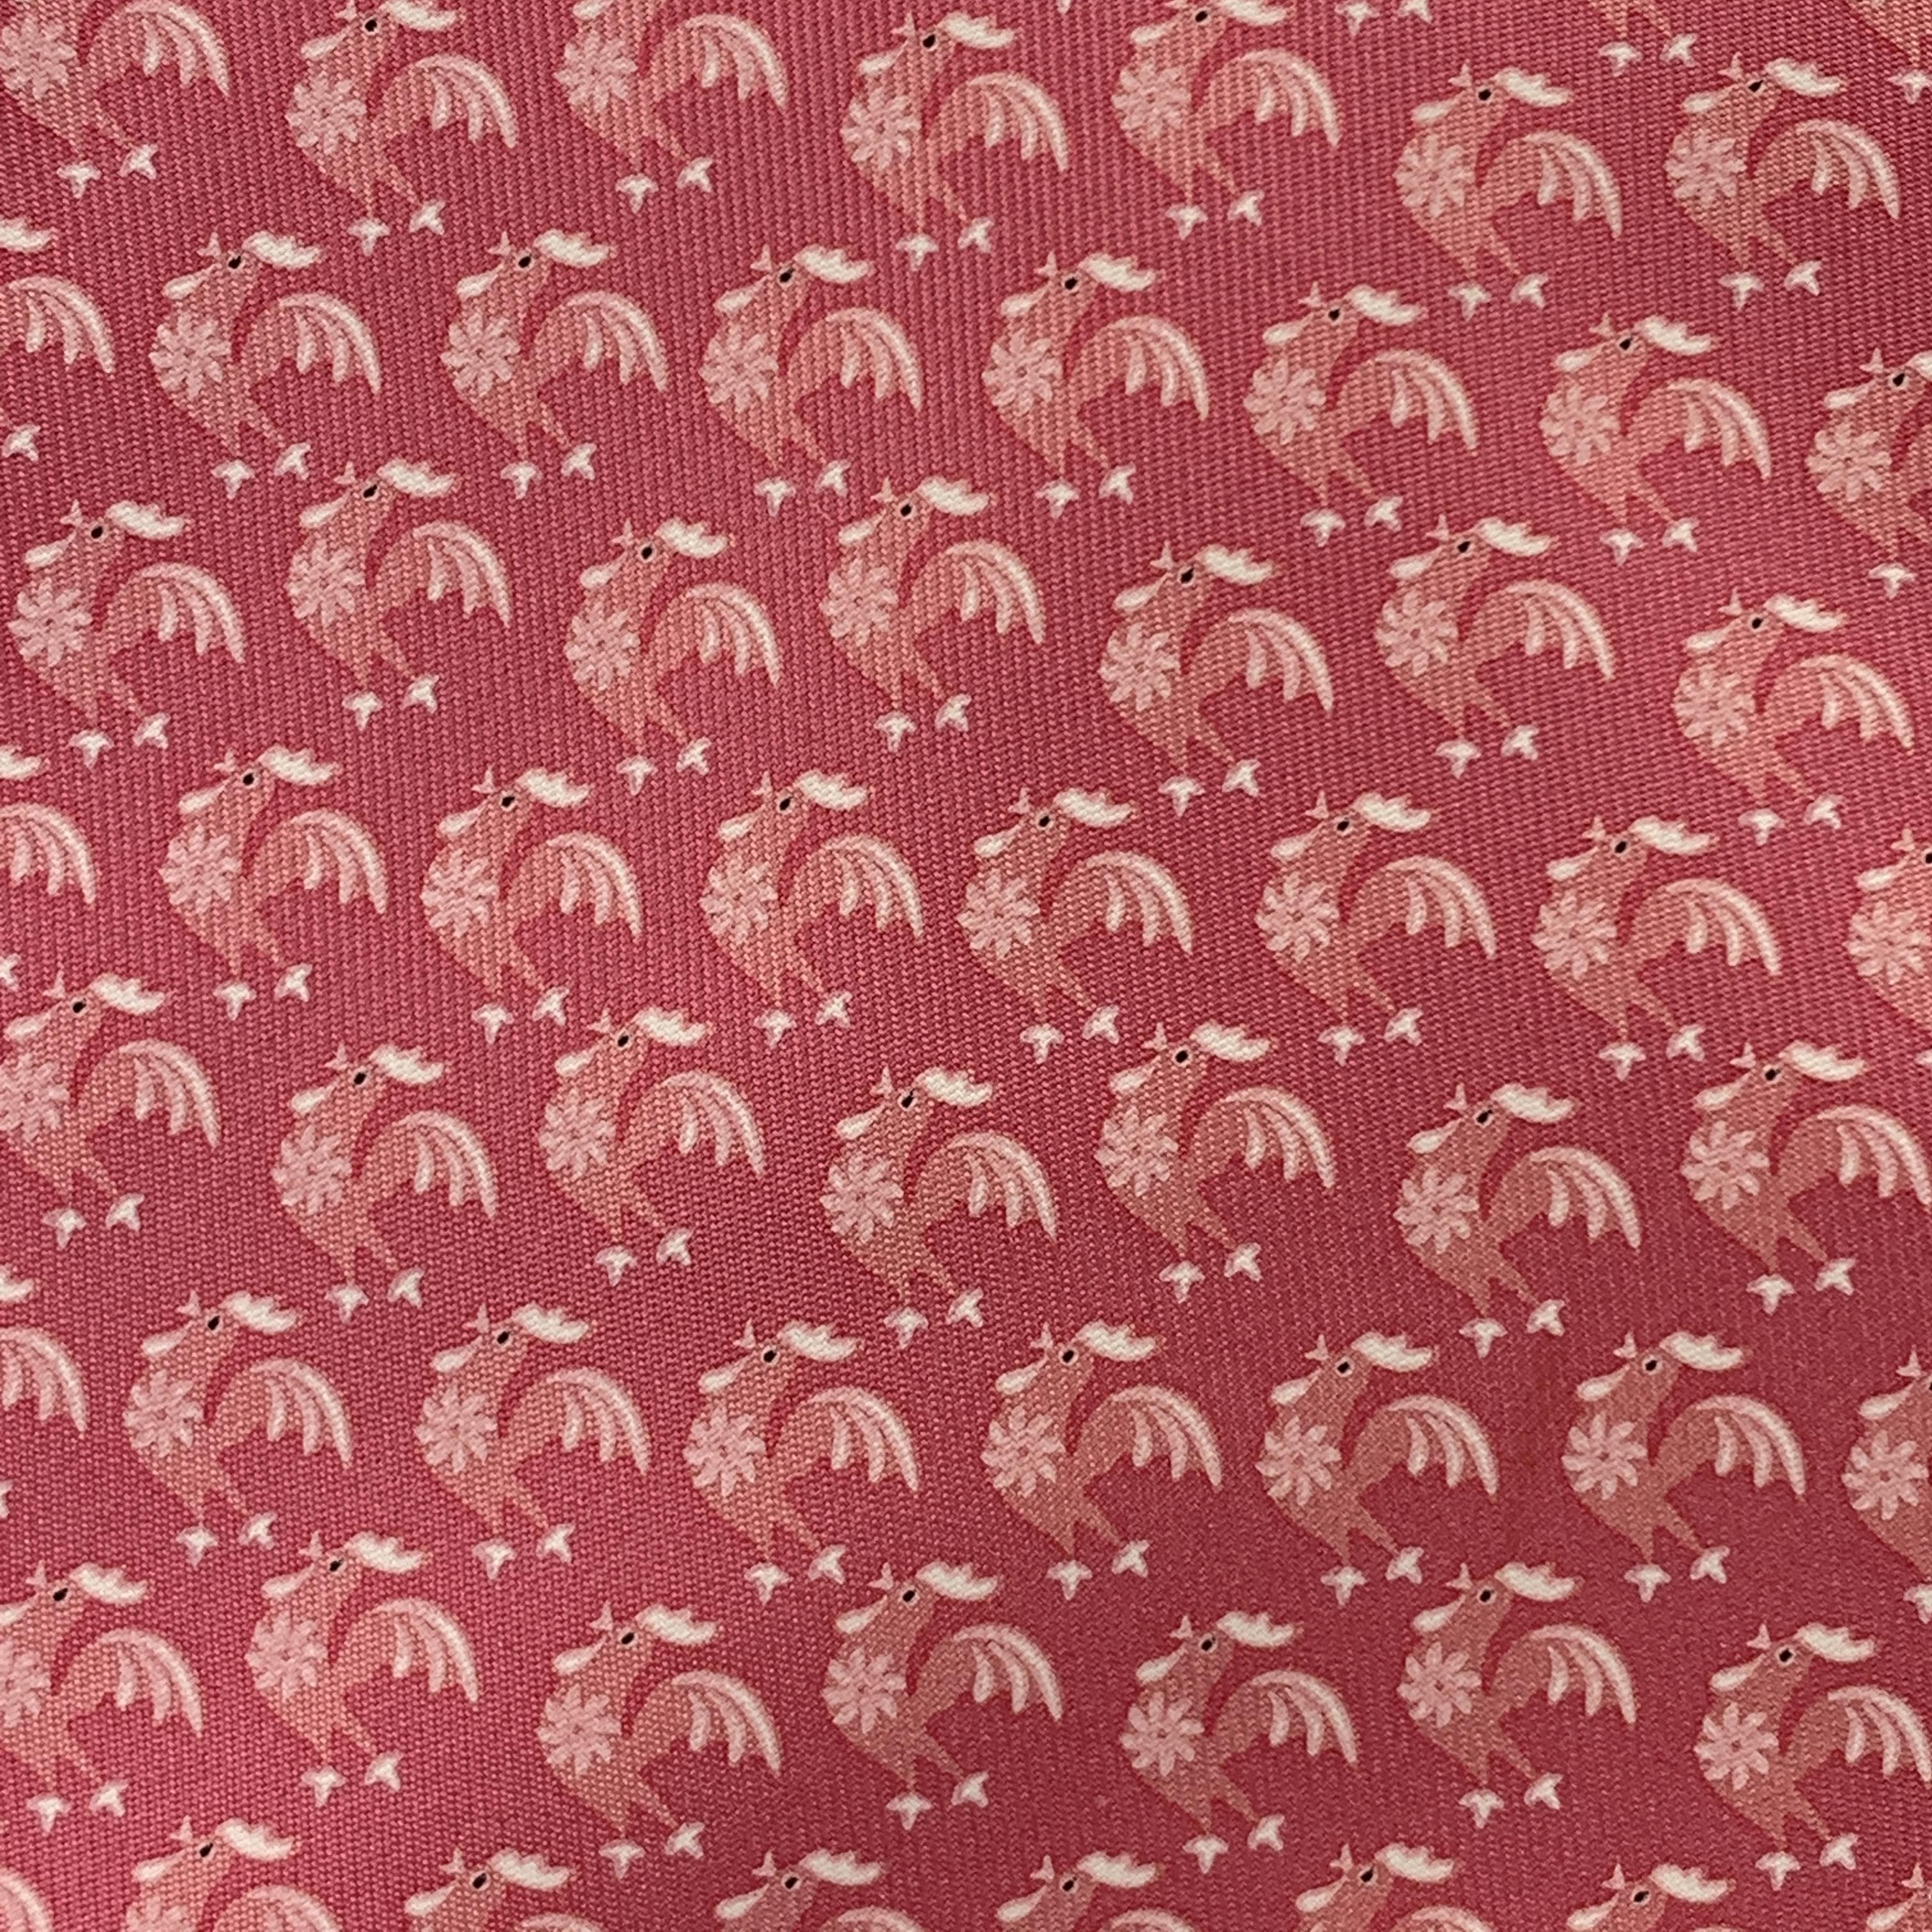 SALVATORE FERRAGAMO necktie comes in pink silk with all over rooster print. Made in Italy.

Excellent Pre-Owned Condition.

Width: 4 in.  